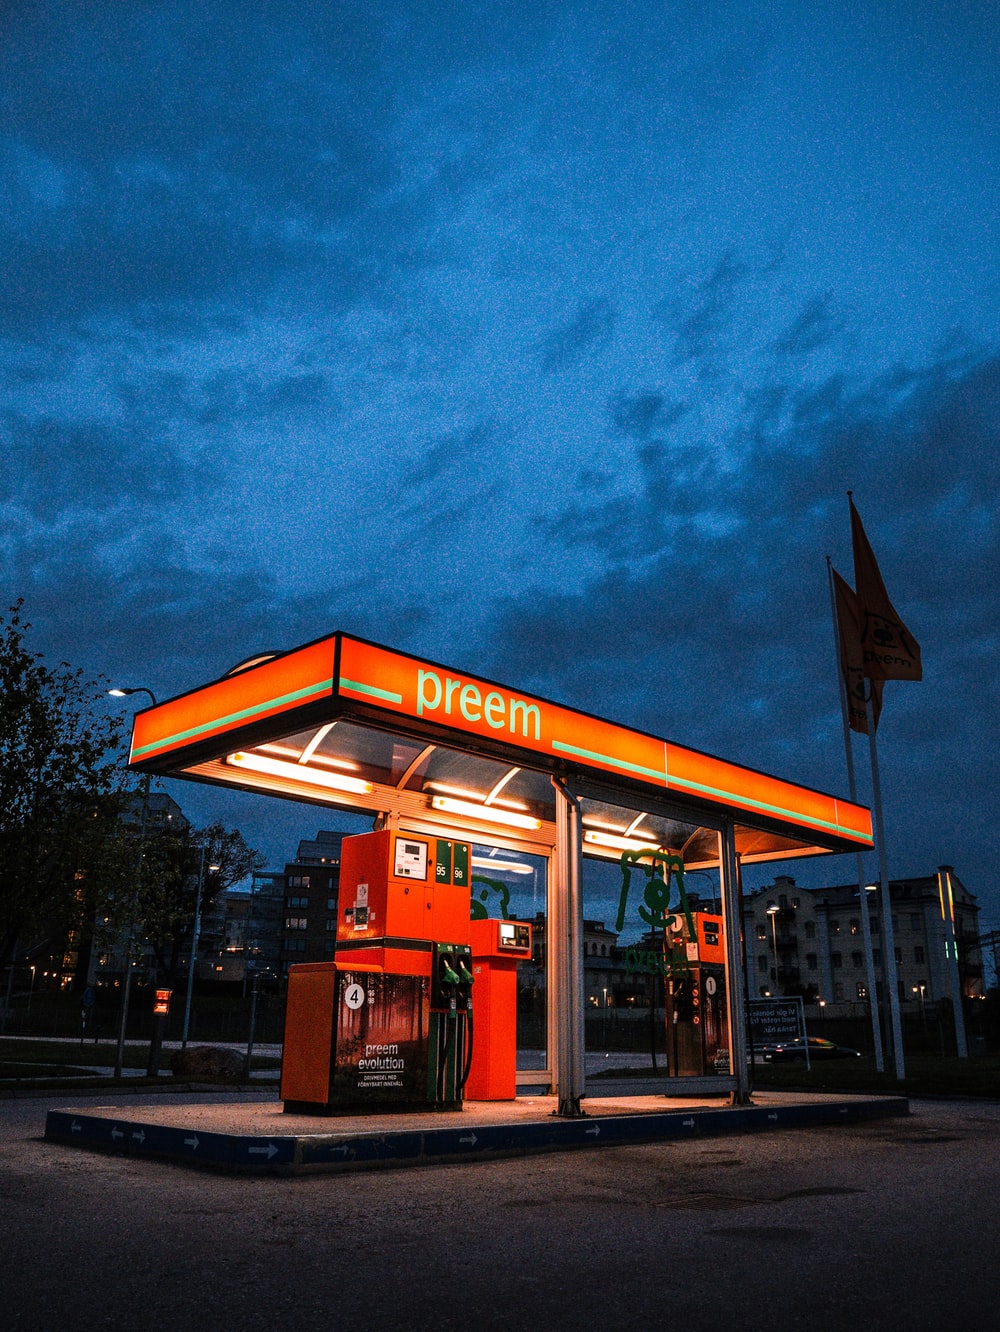 Petrol Pump Picture. Download Free Image